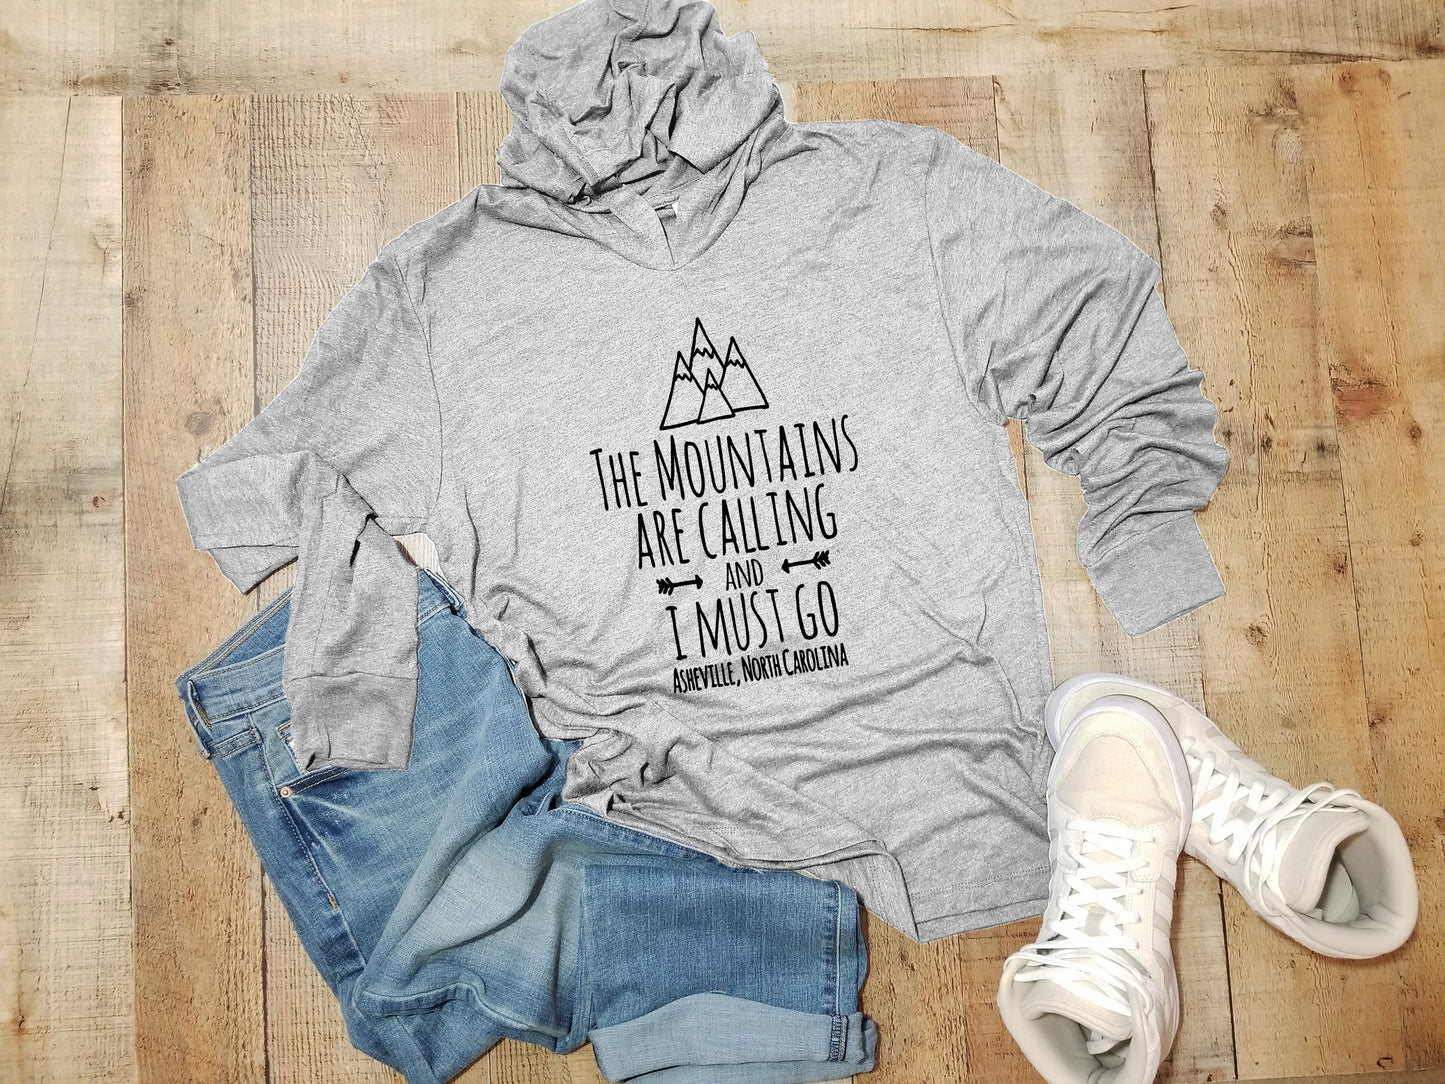 The Mountains Are Calling And I Must Go, Asheville North Carolina - Unisex T-Shirt Hoodie - Heather Gray